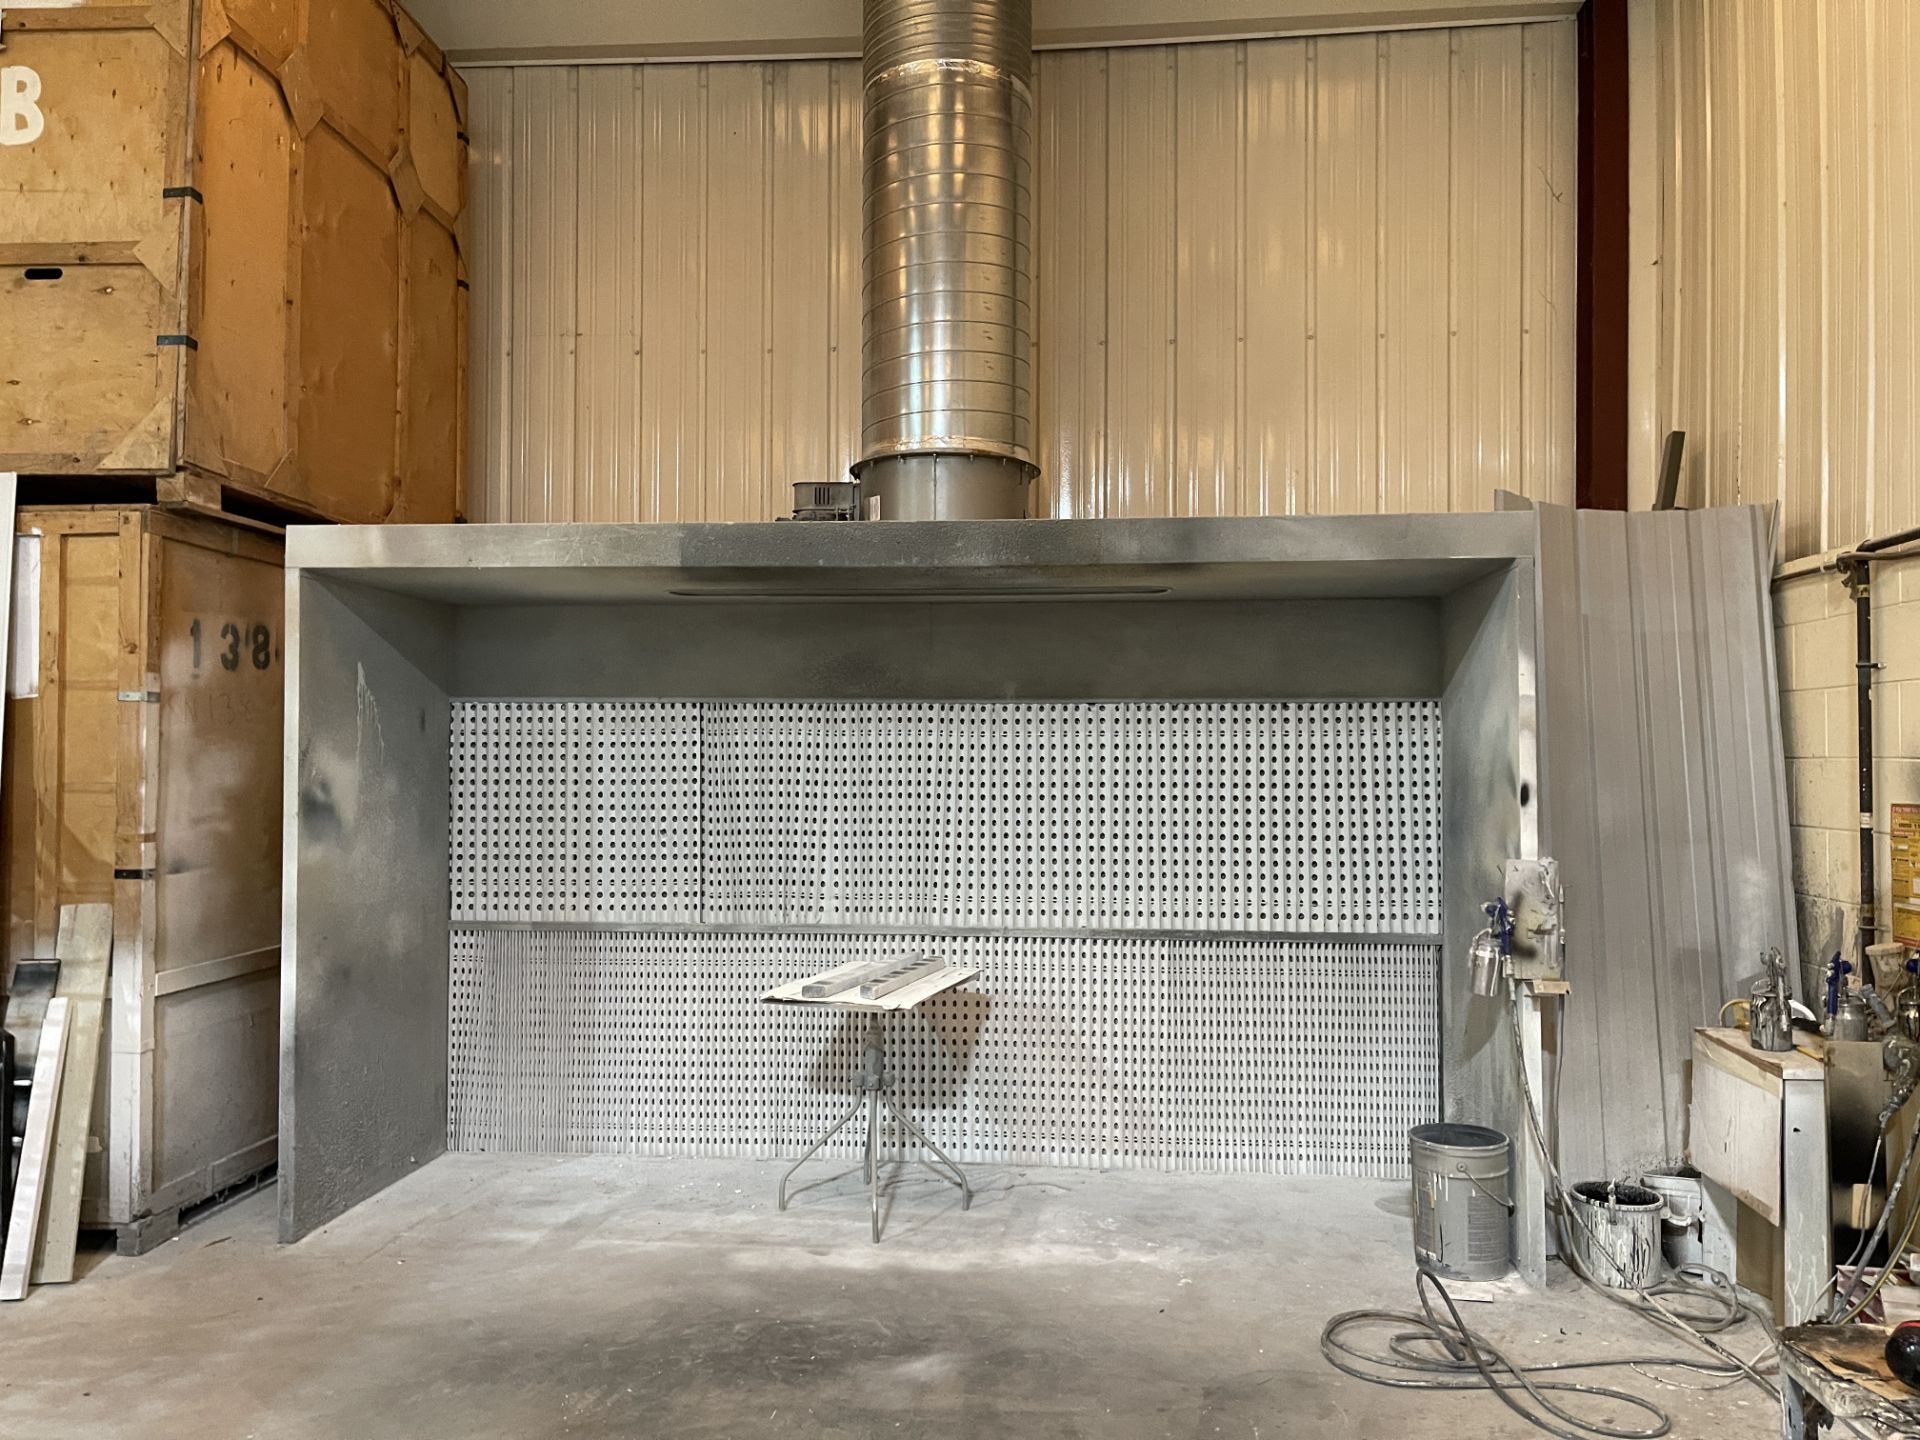 Dryback Spray Booth together with all Associated Equipment to Include Spray Guns - Please Note